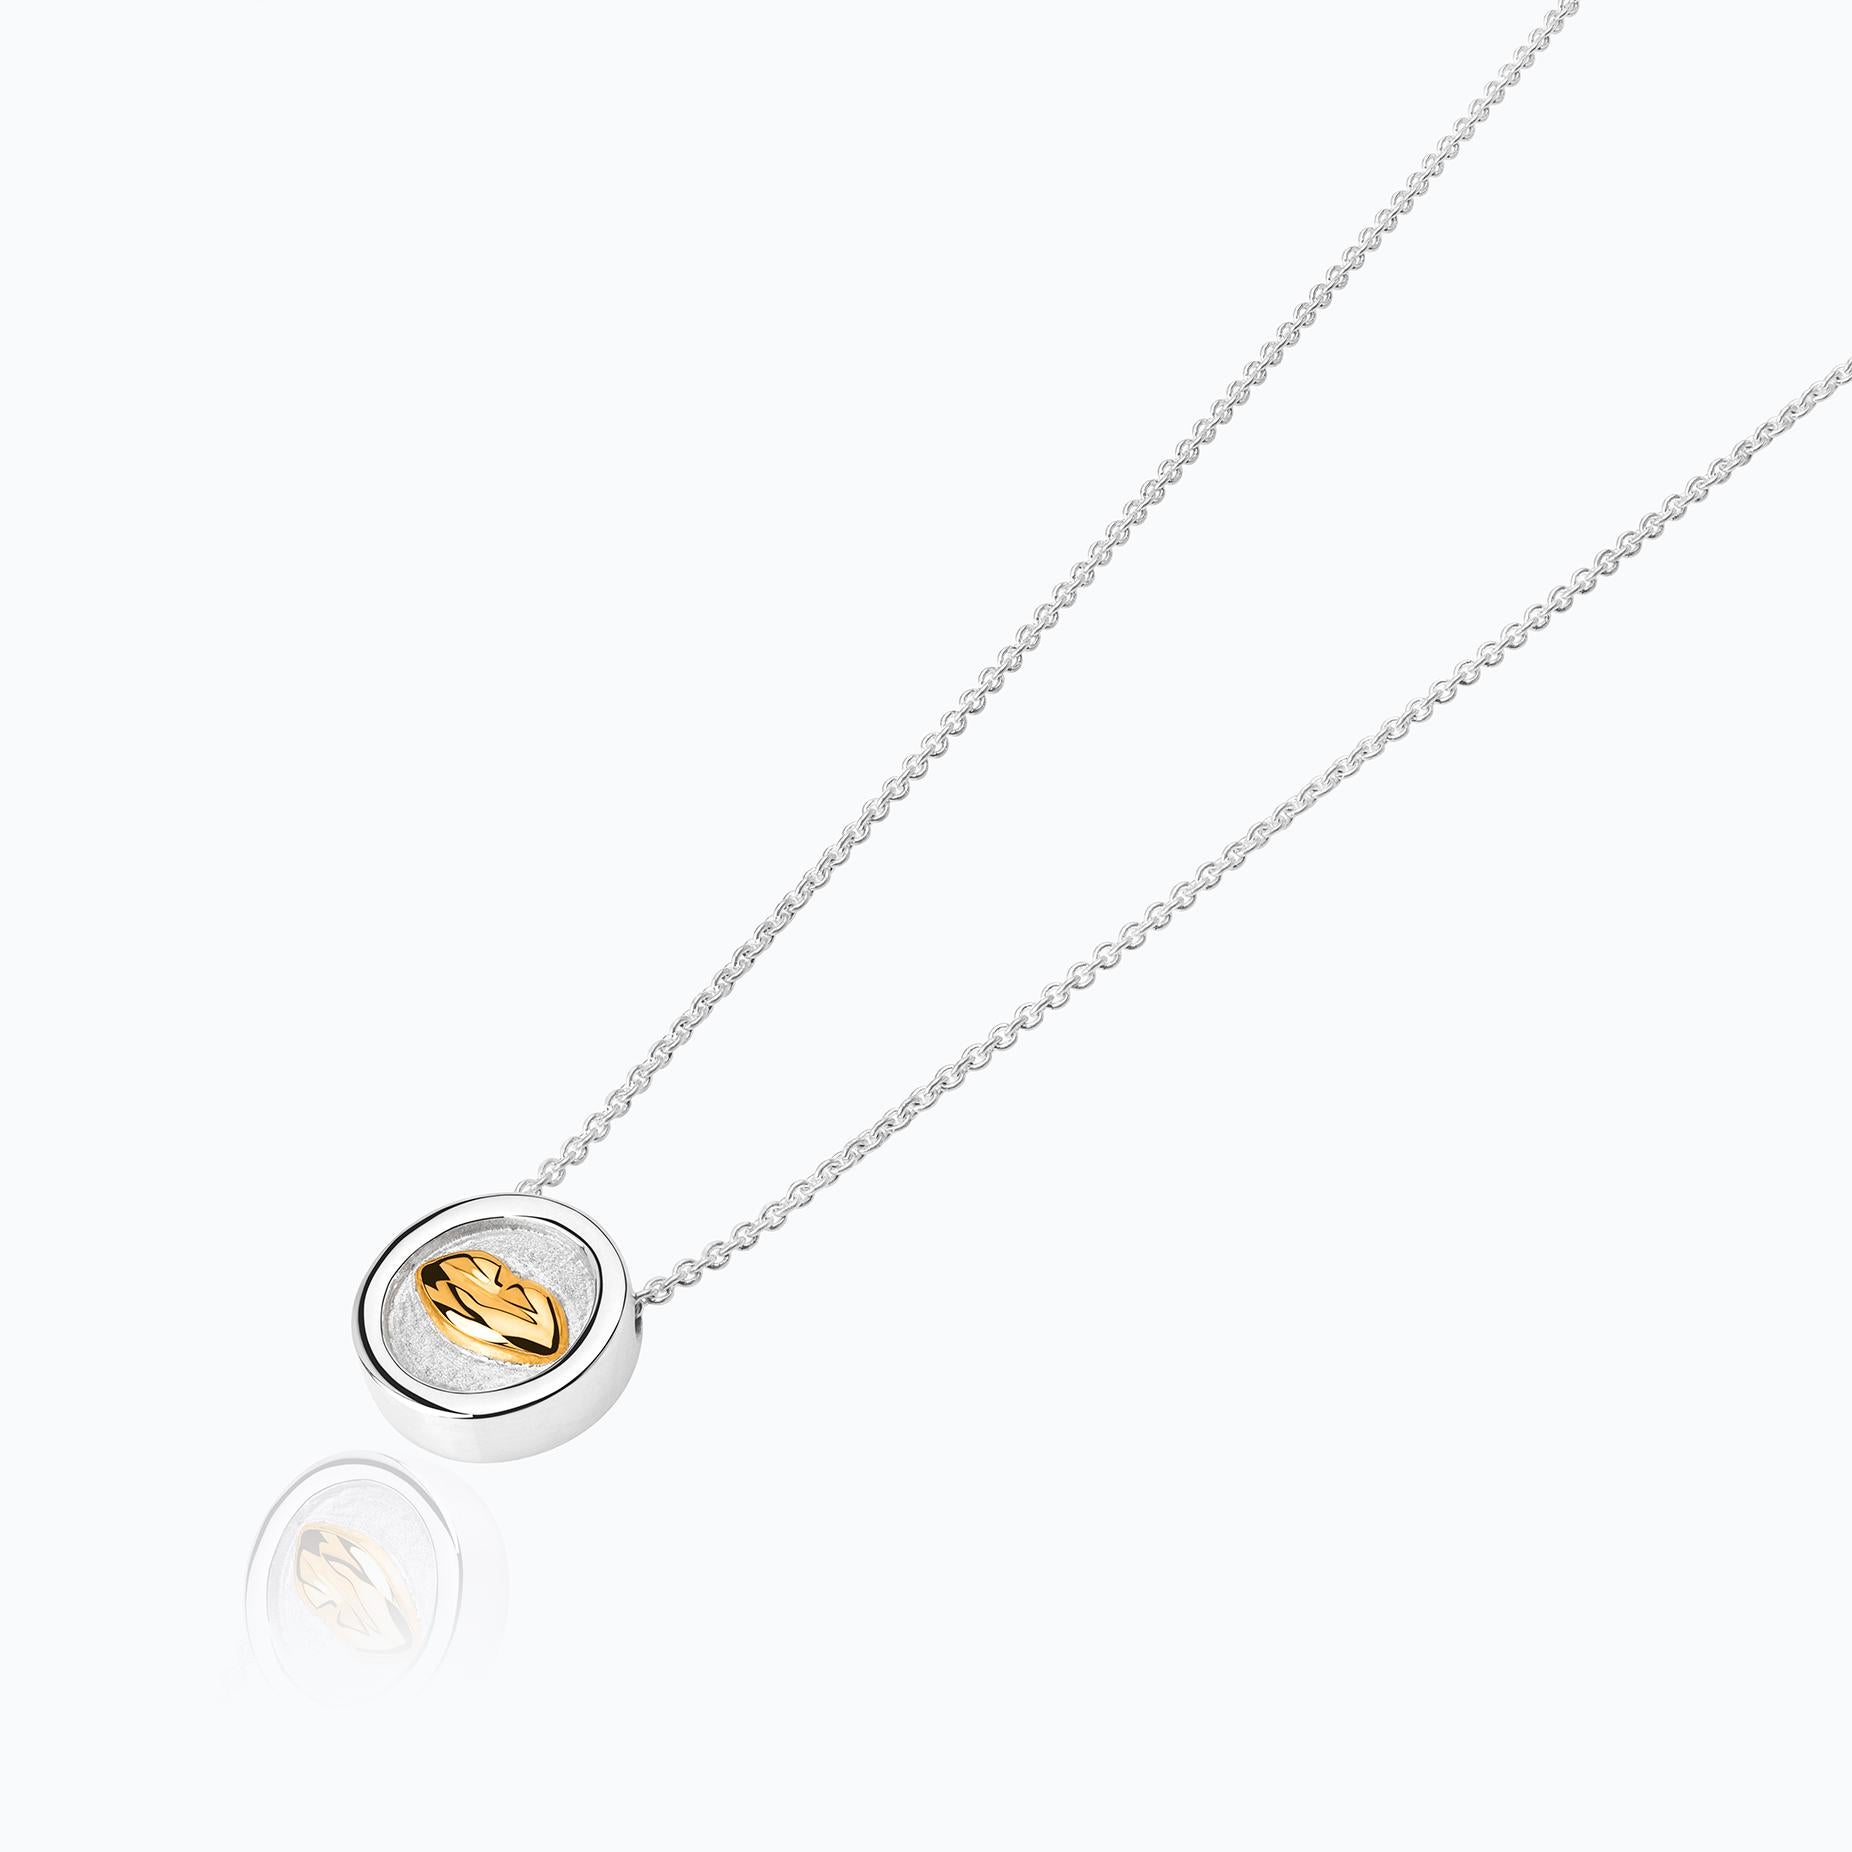 The Bésame Medal Vermeil Pendant from the Bésame collection by TANE is made in sterling silver with 23 karat yellow gold vermeil. In the center of the medal, the collection's insignia kiss emerges in relief, framed by a polished silver bezel, the